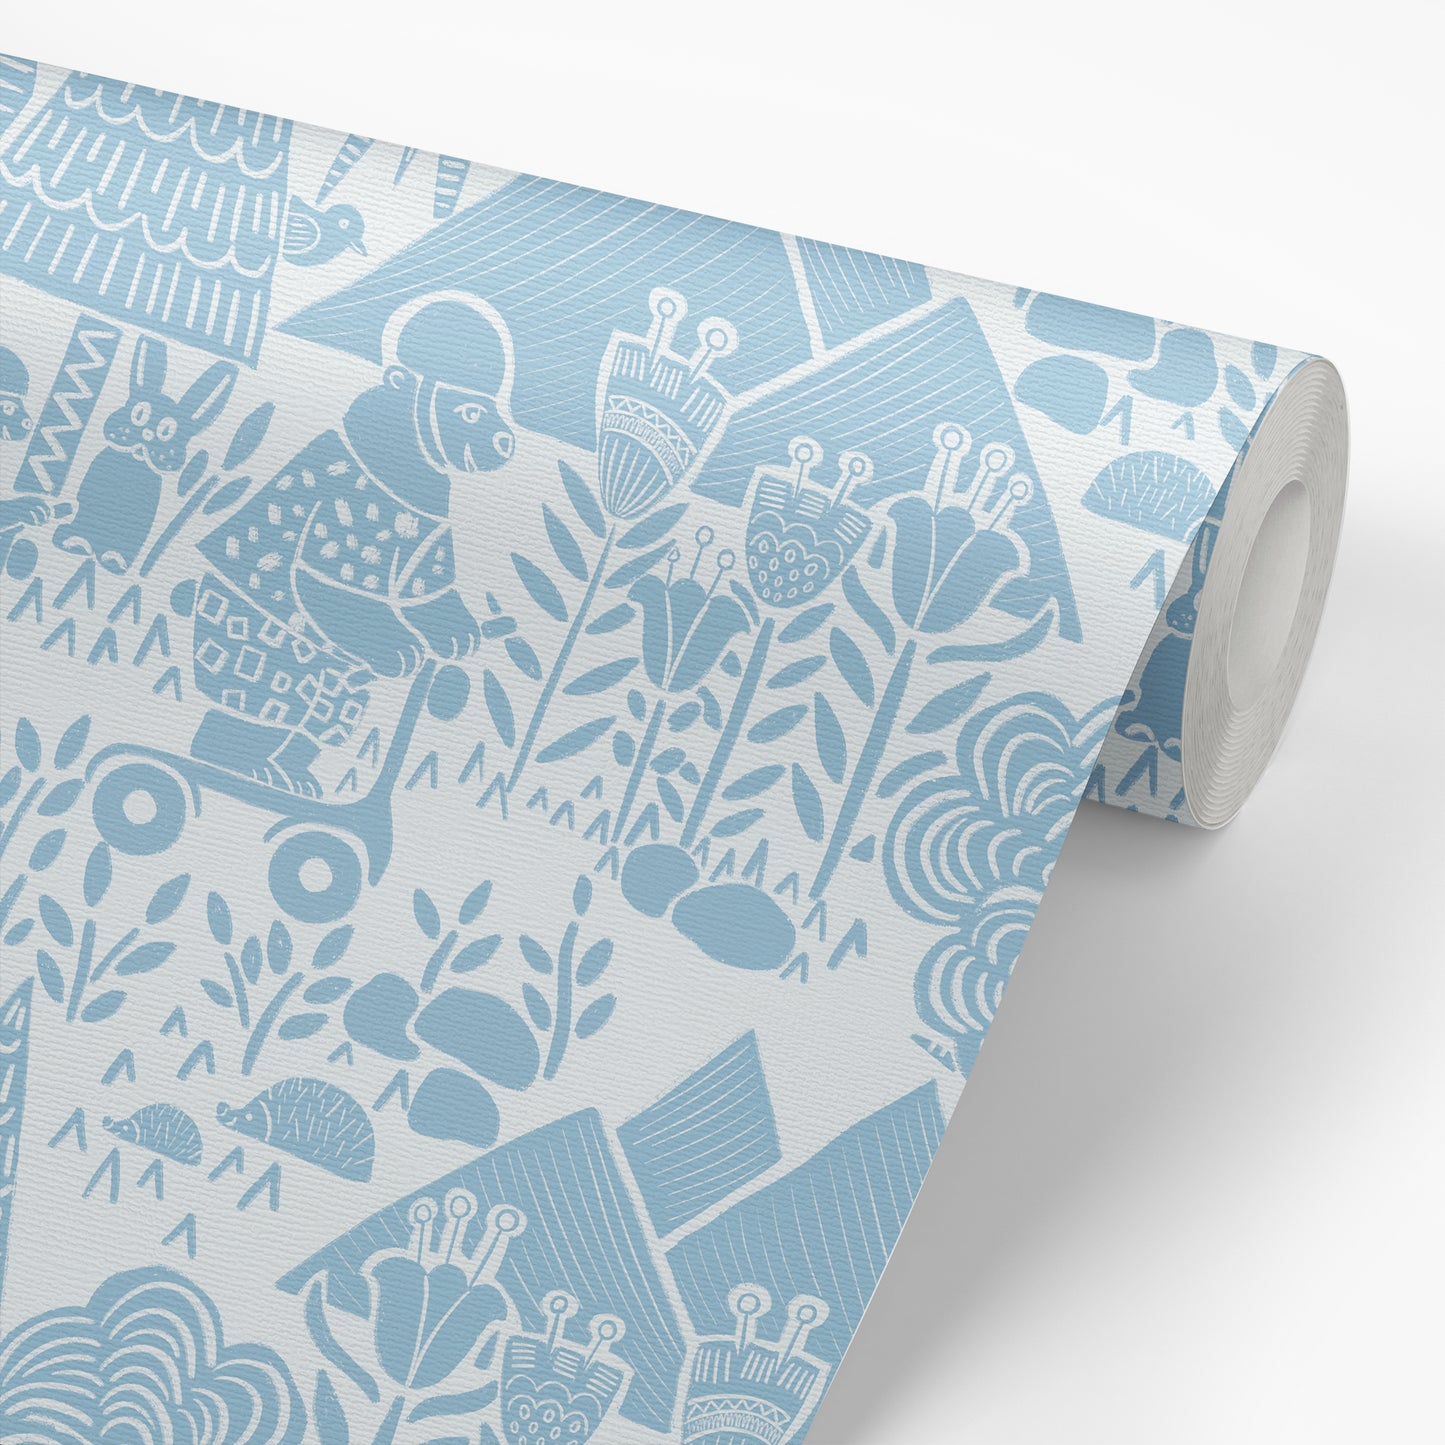 Scooting Bears Wallpaper in Blue shown on a roll of wallpaper.